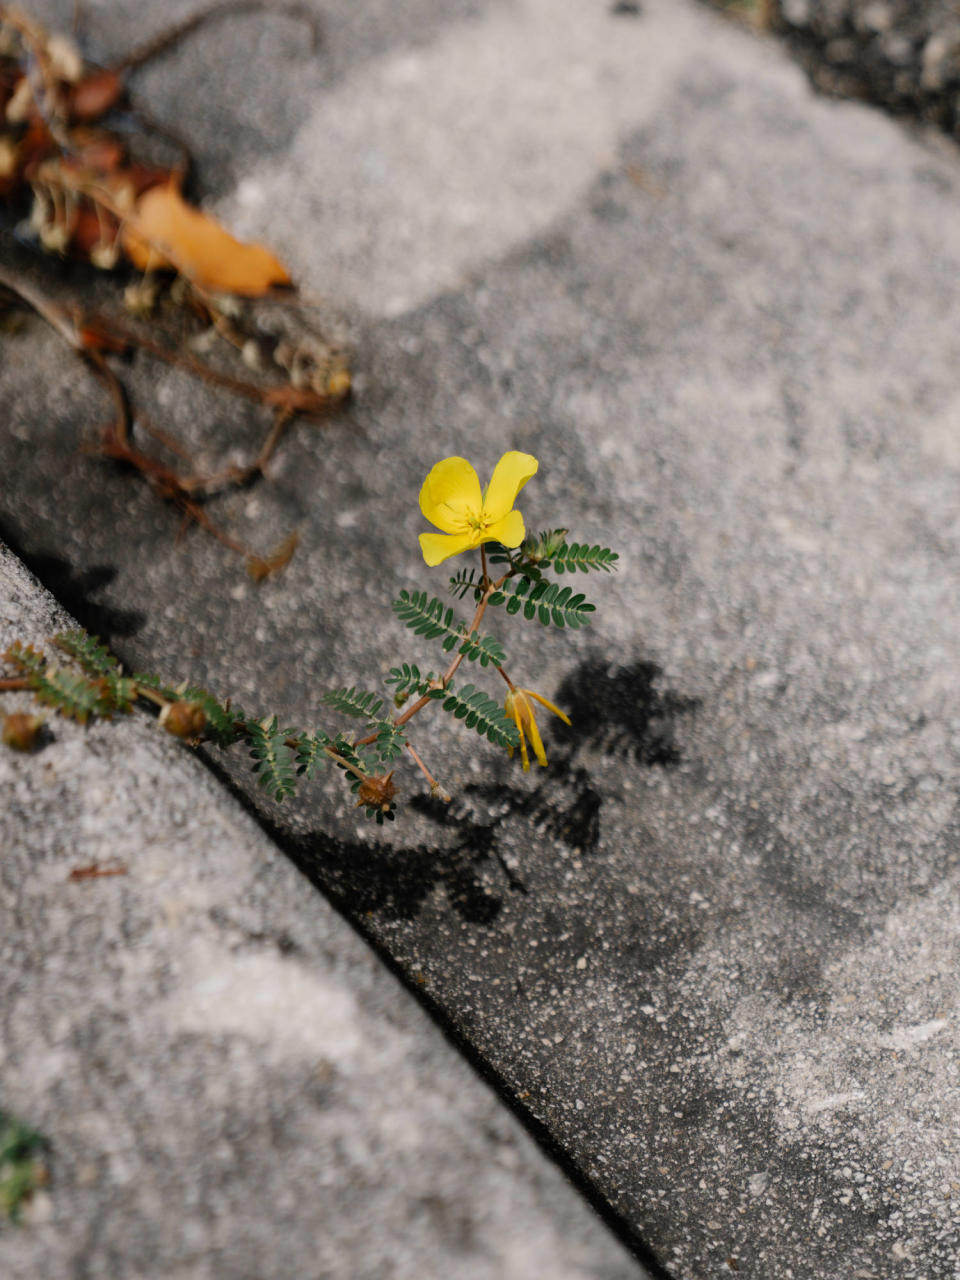 A yellow flower emerges from a concrete sidewalk (Martina Tuaty for NBC News)